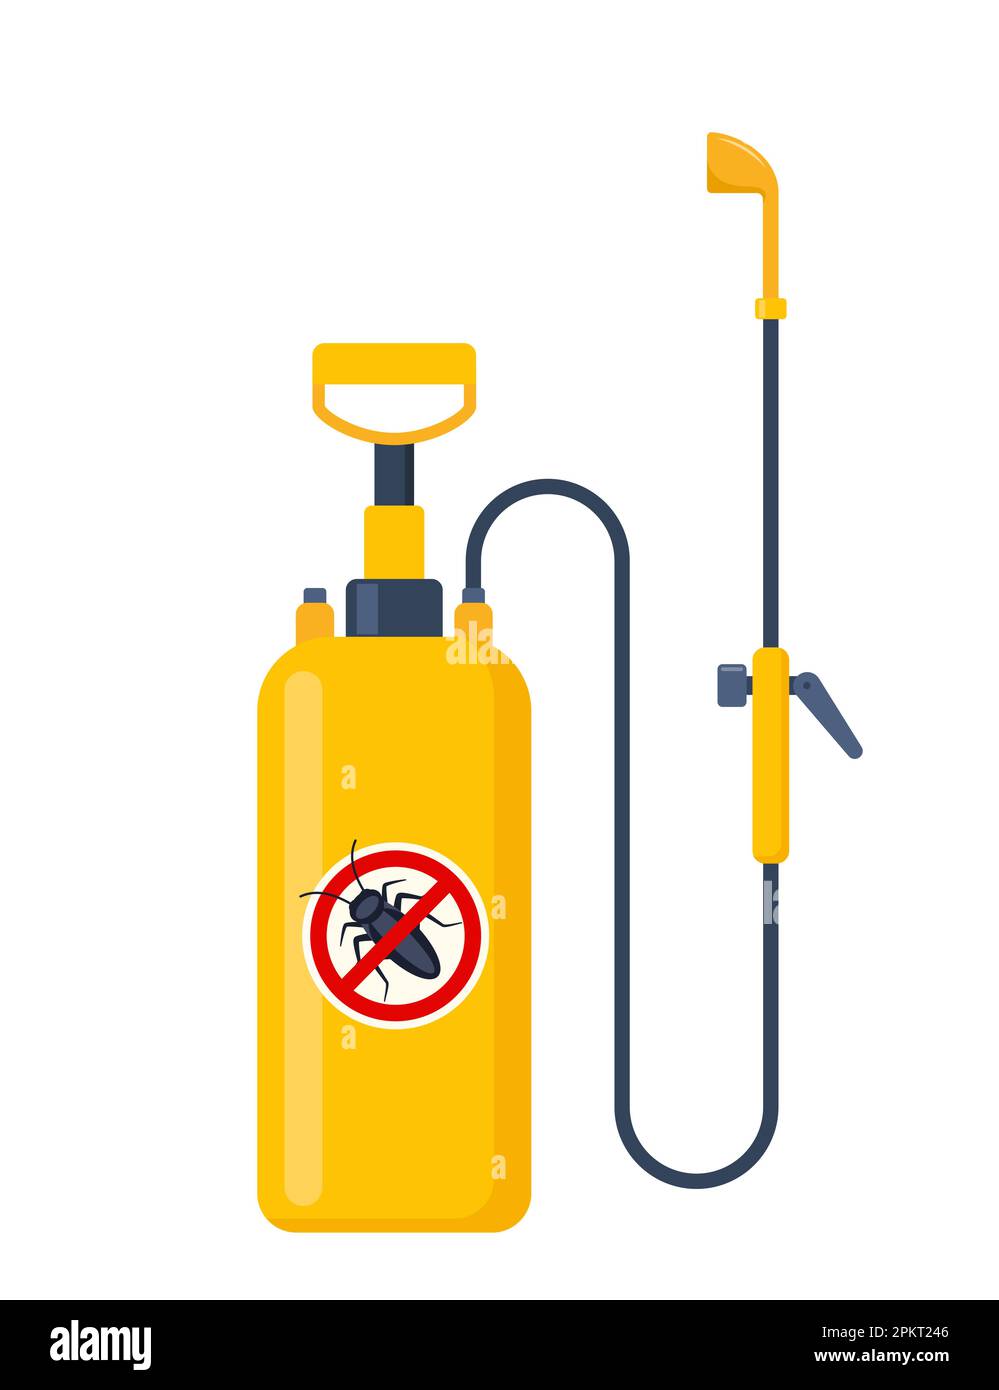 Yellow pressure sprayer of chemical insecticide, pest control and extermination service equipment. Protection from the cockroach and other insect. Aer Stock Vector